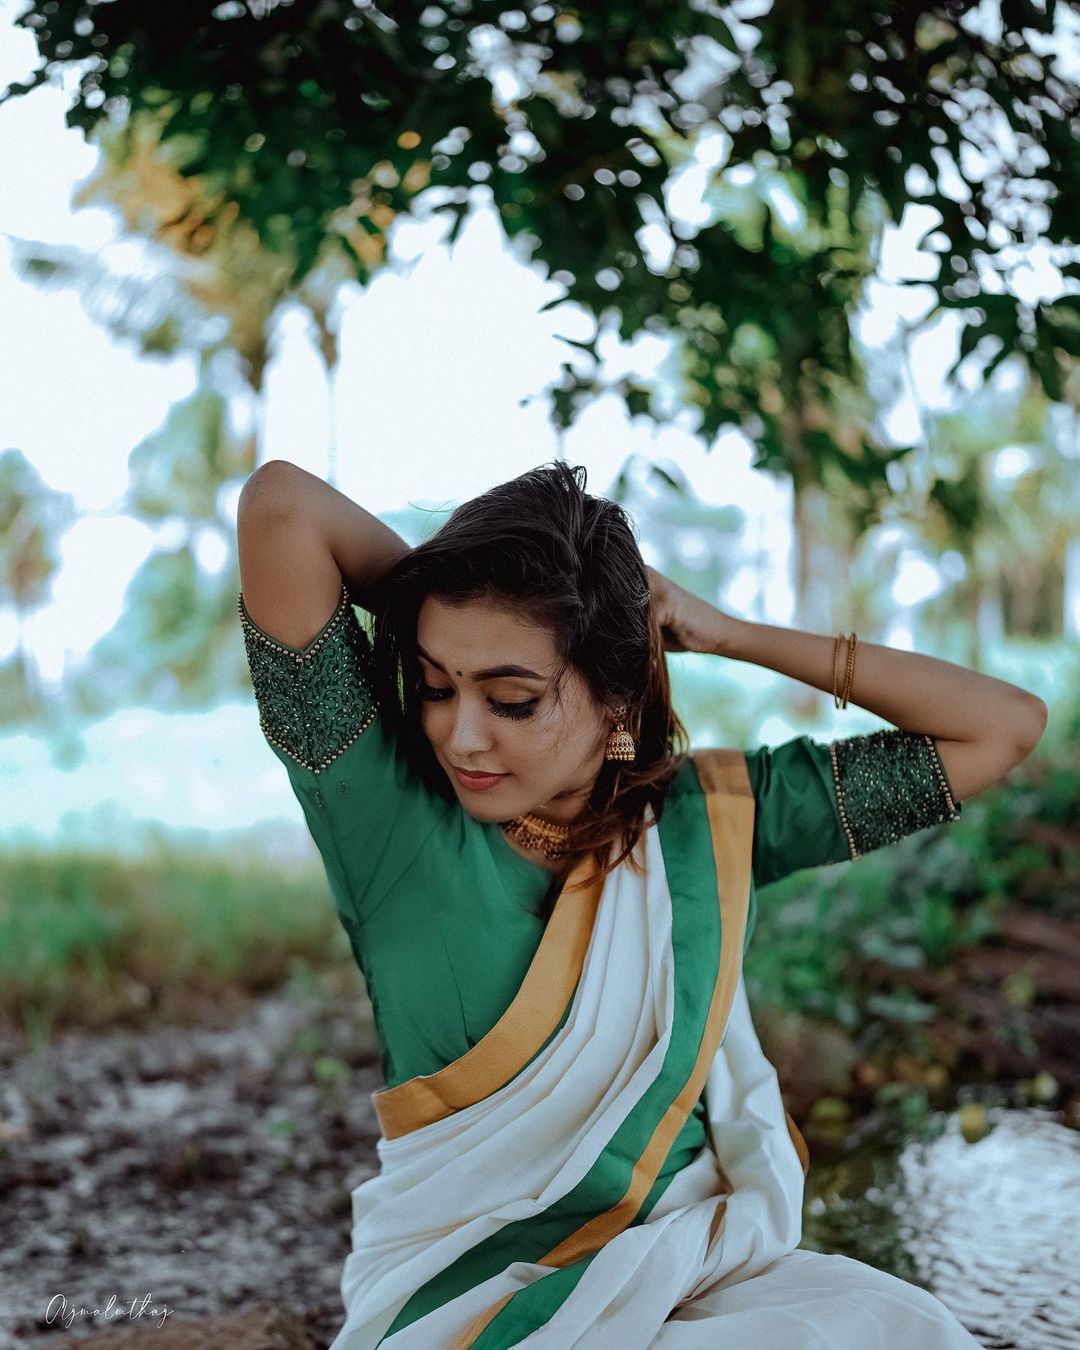 South Indian Instagram model star Mithuvigil hot photos in sexy saree. Mithuvigil Instagram photos and video download. Desi South Indian women videos.